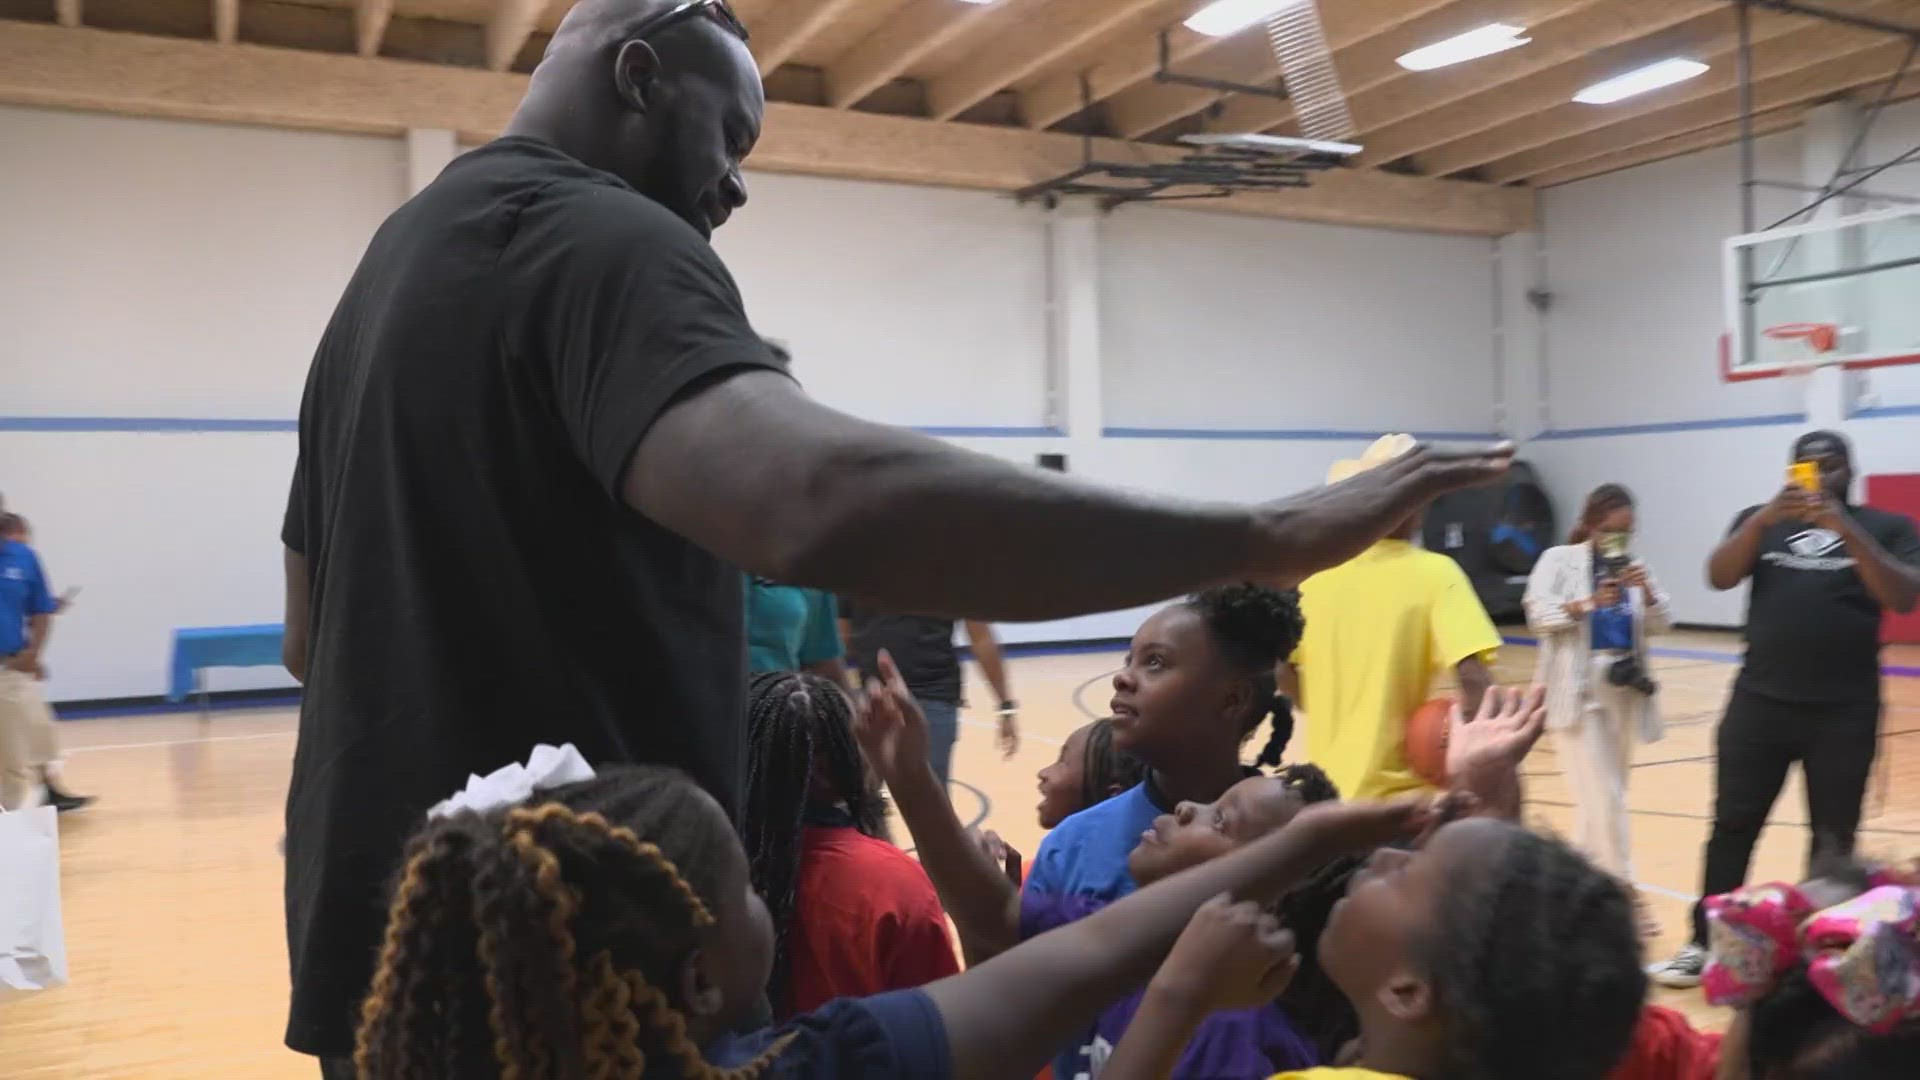 Shaq has a home in North Texas and has donated to renovations for this Boys & Girls Club in Oak Cliff.